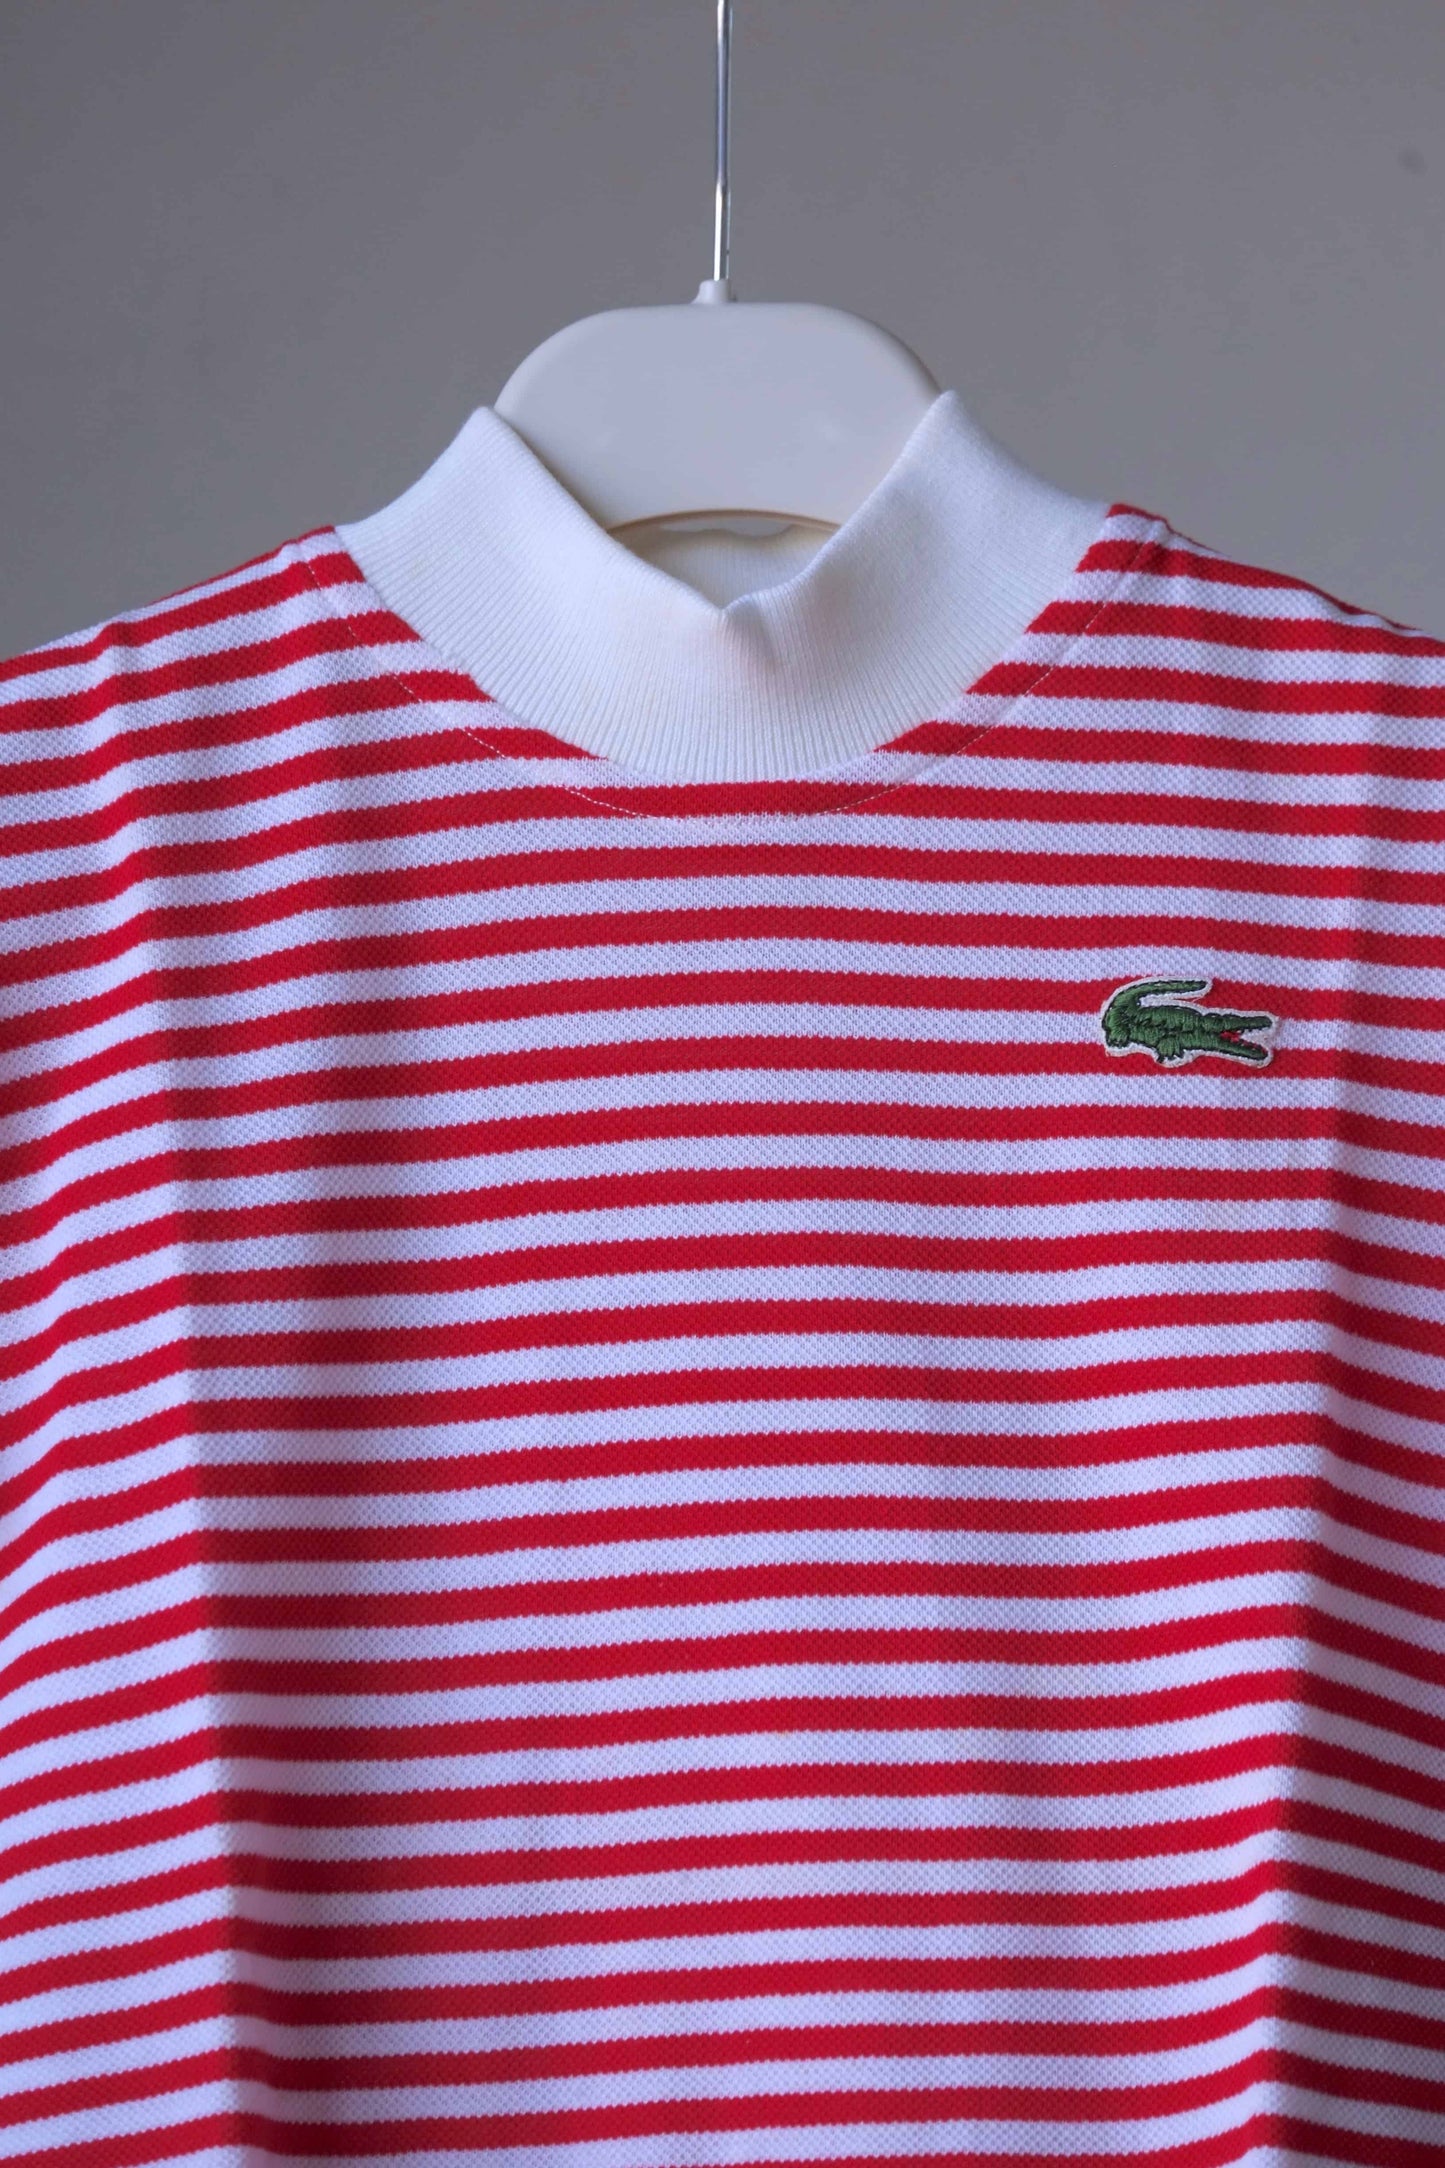 close up of LACOSTE Striped Shirt in red and white